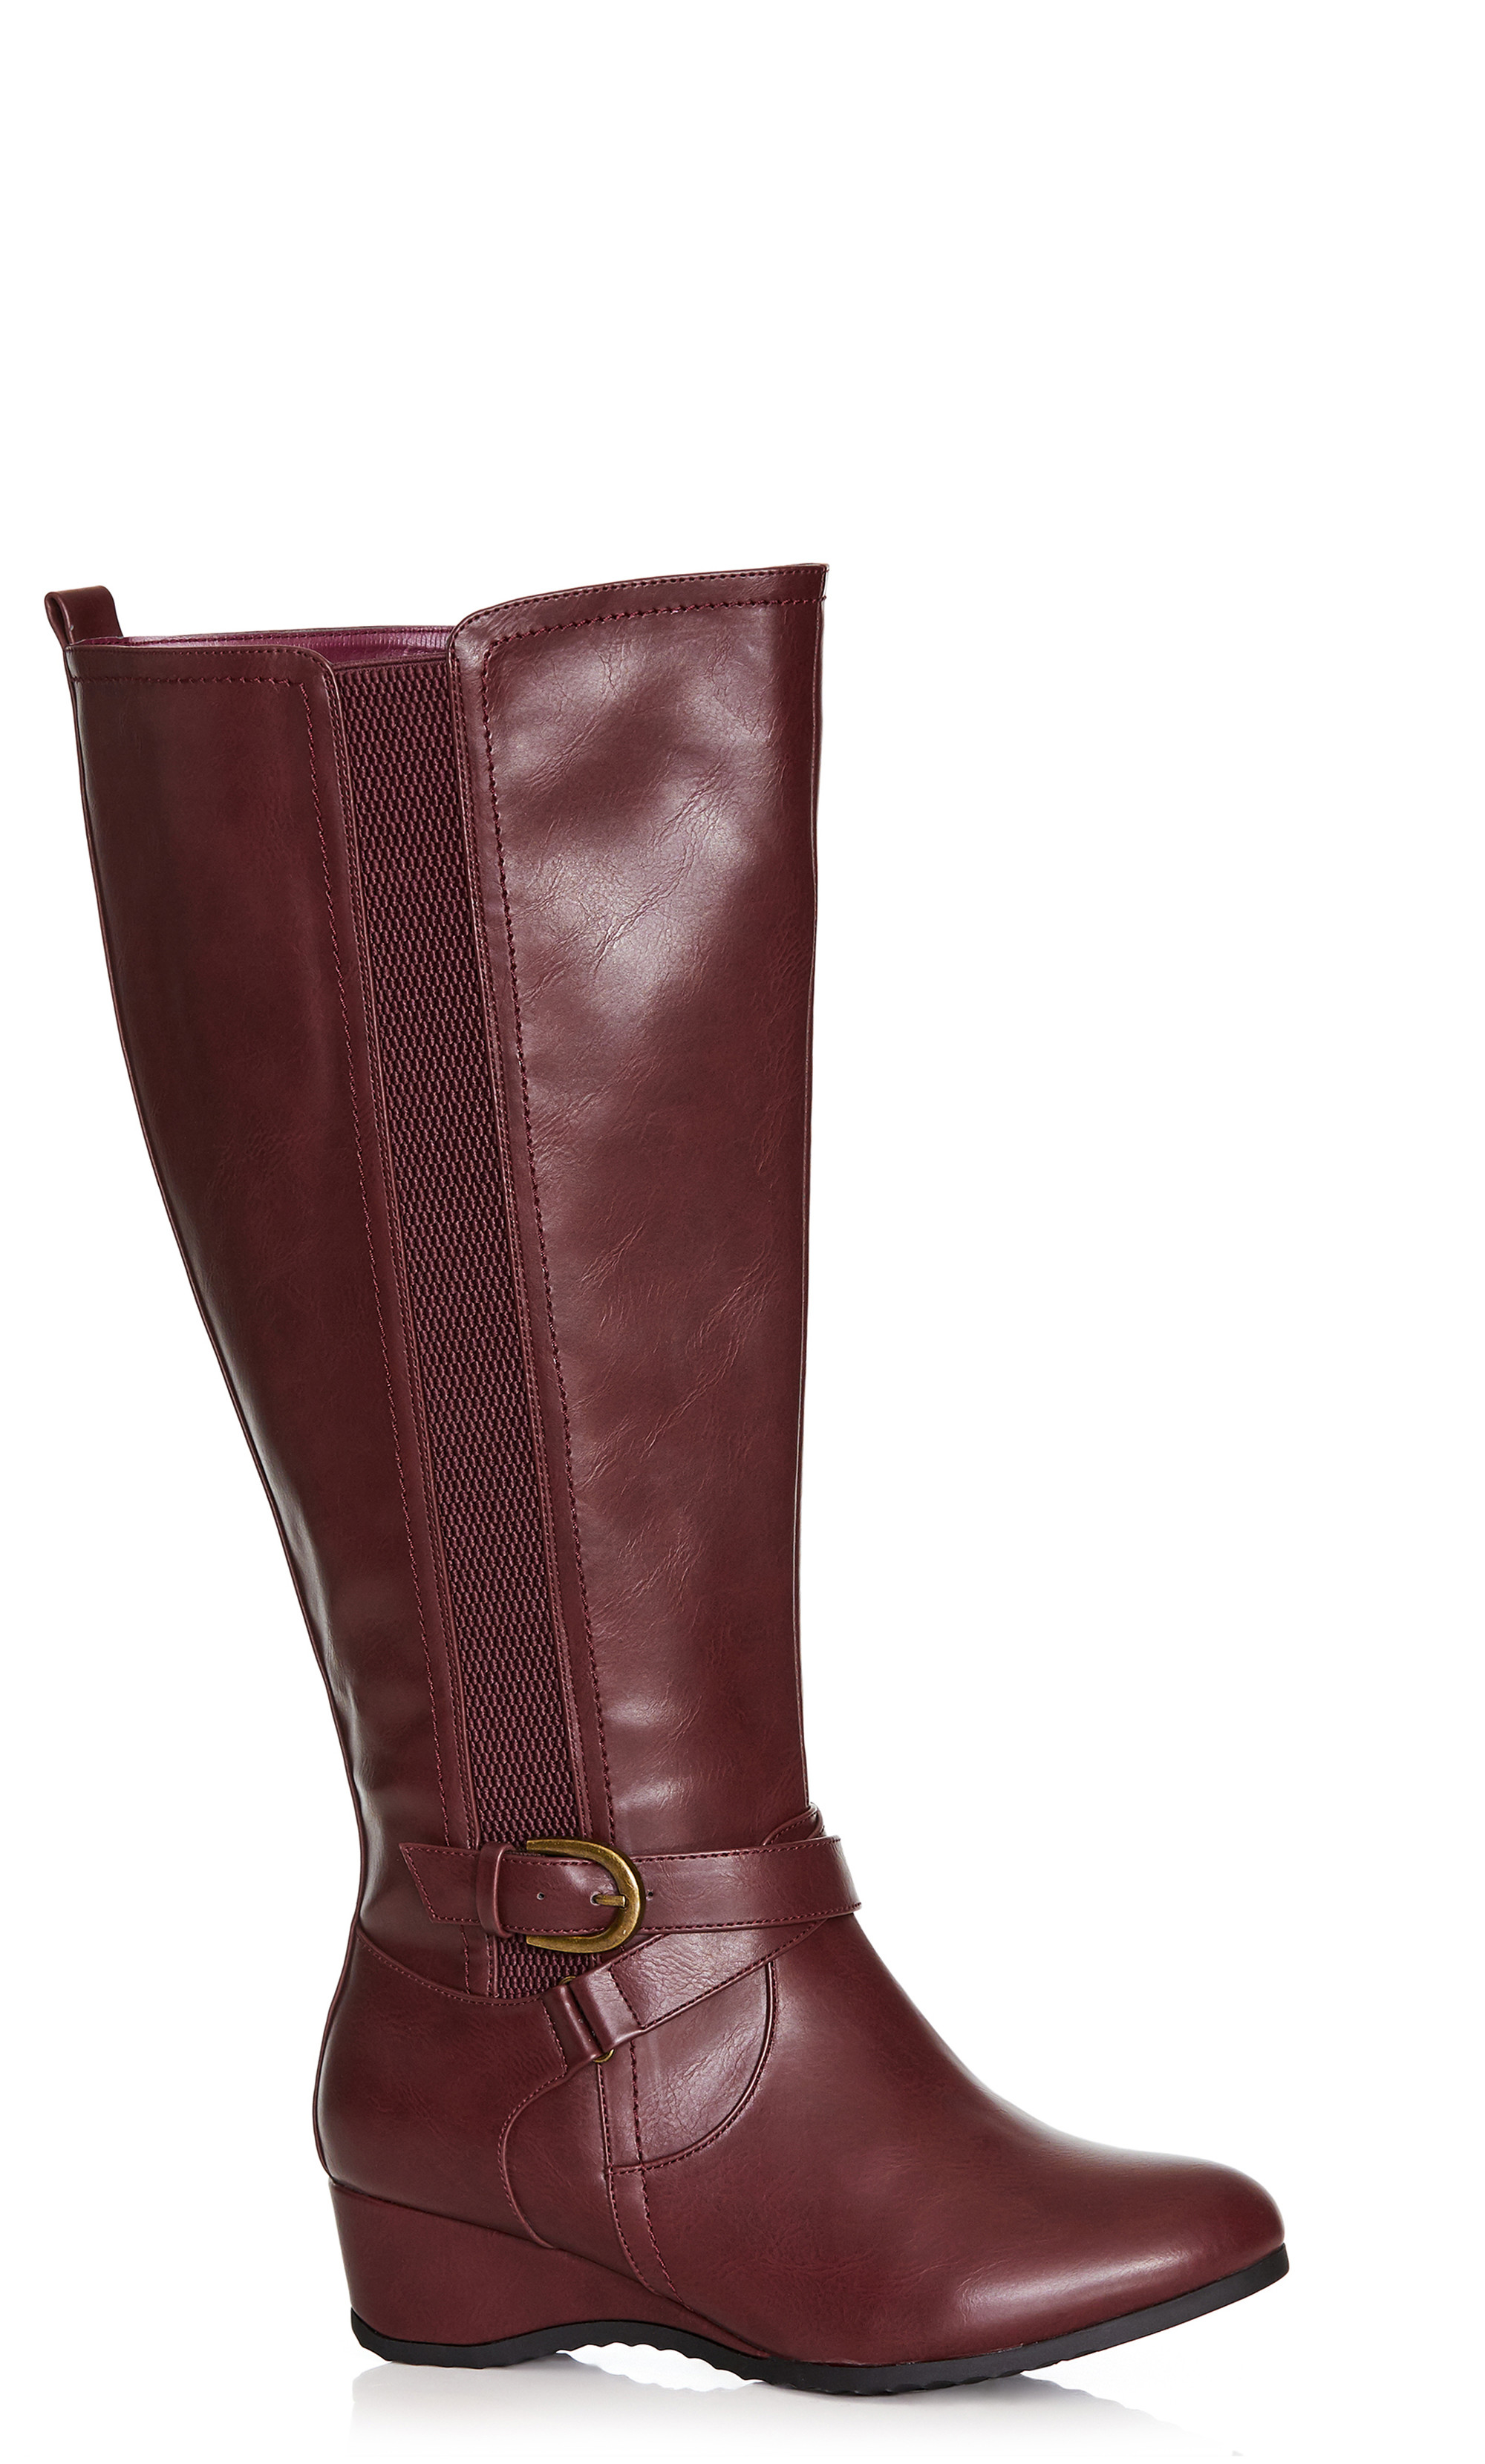 wedge riding boots